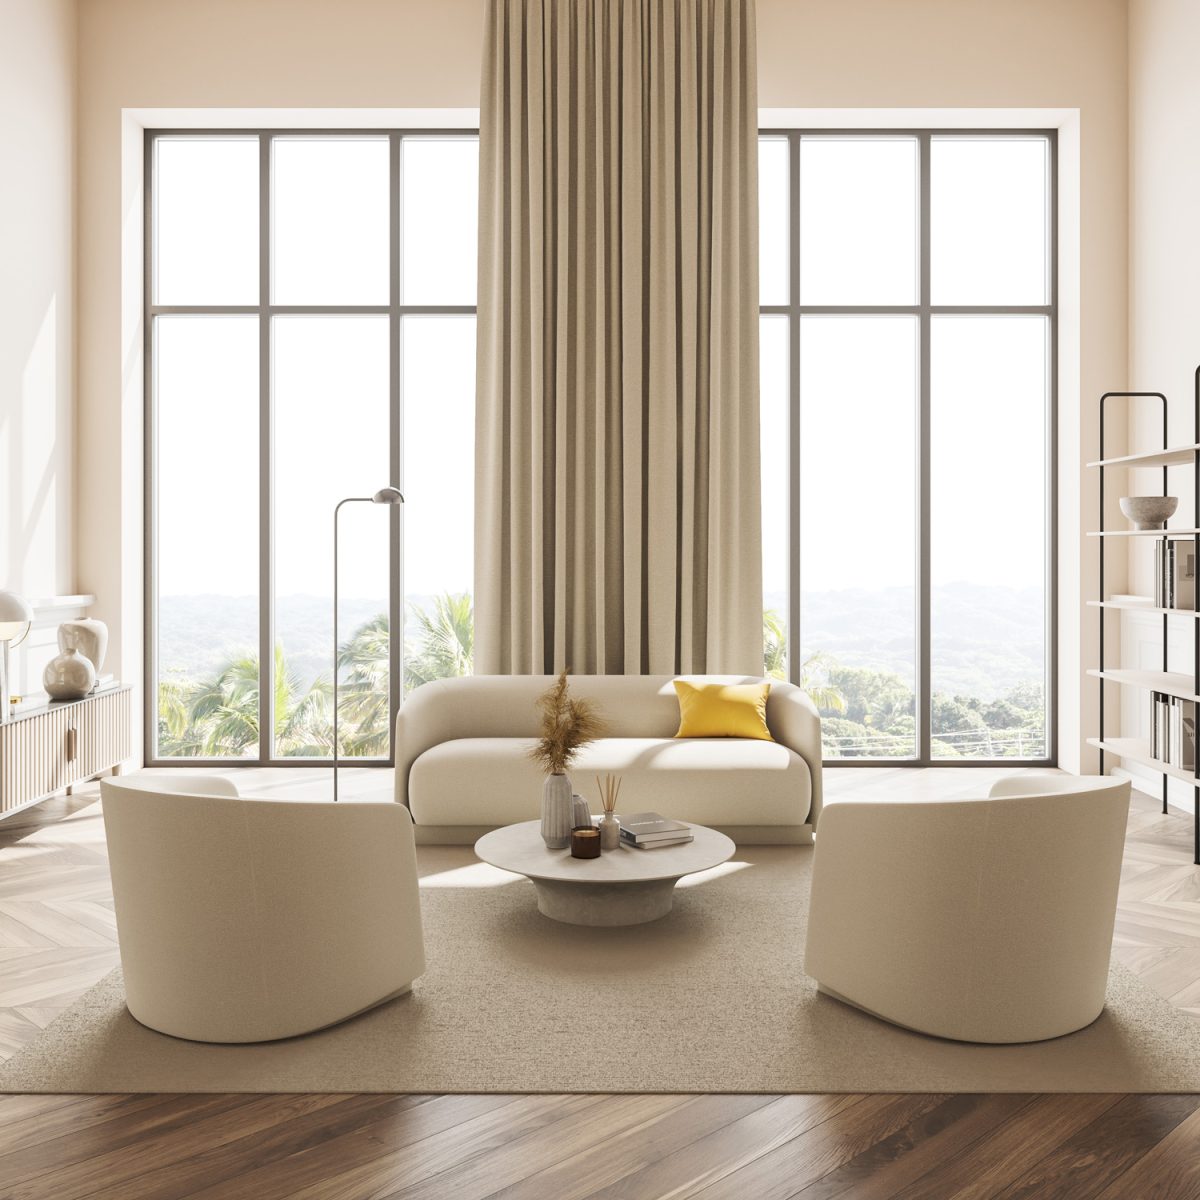 Beige modern design living room interior. Panoramic view from the window. 